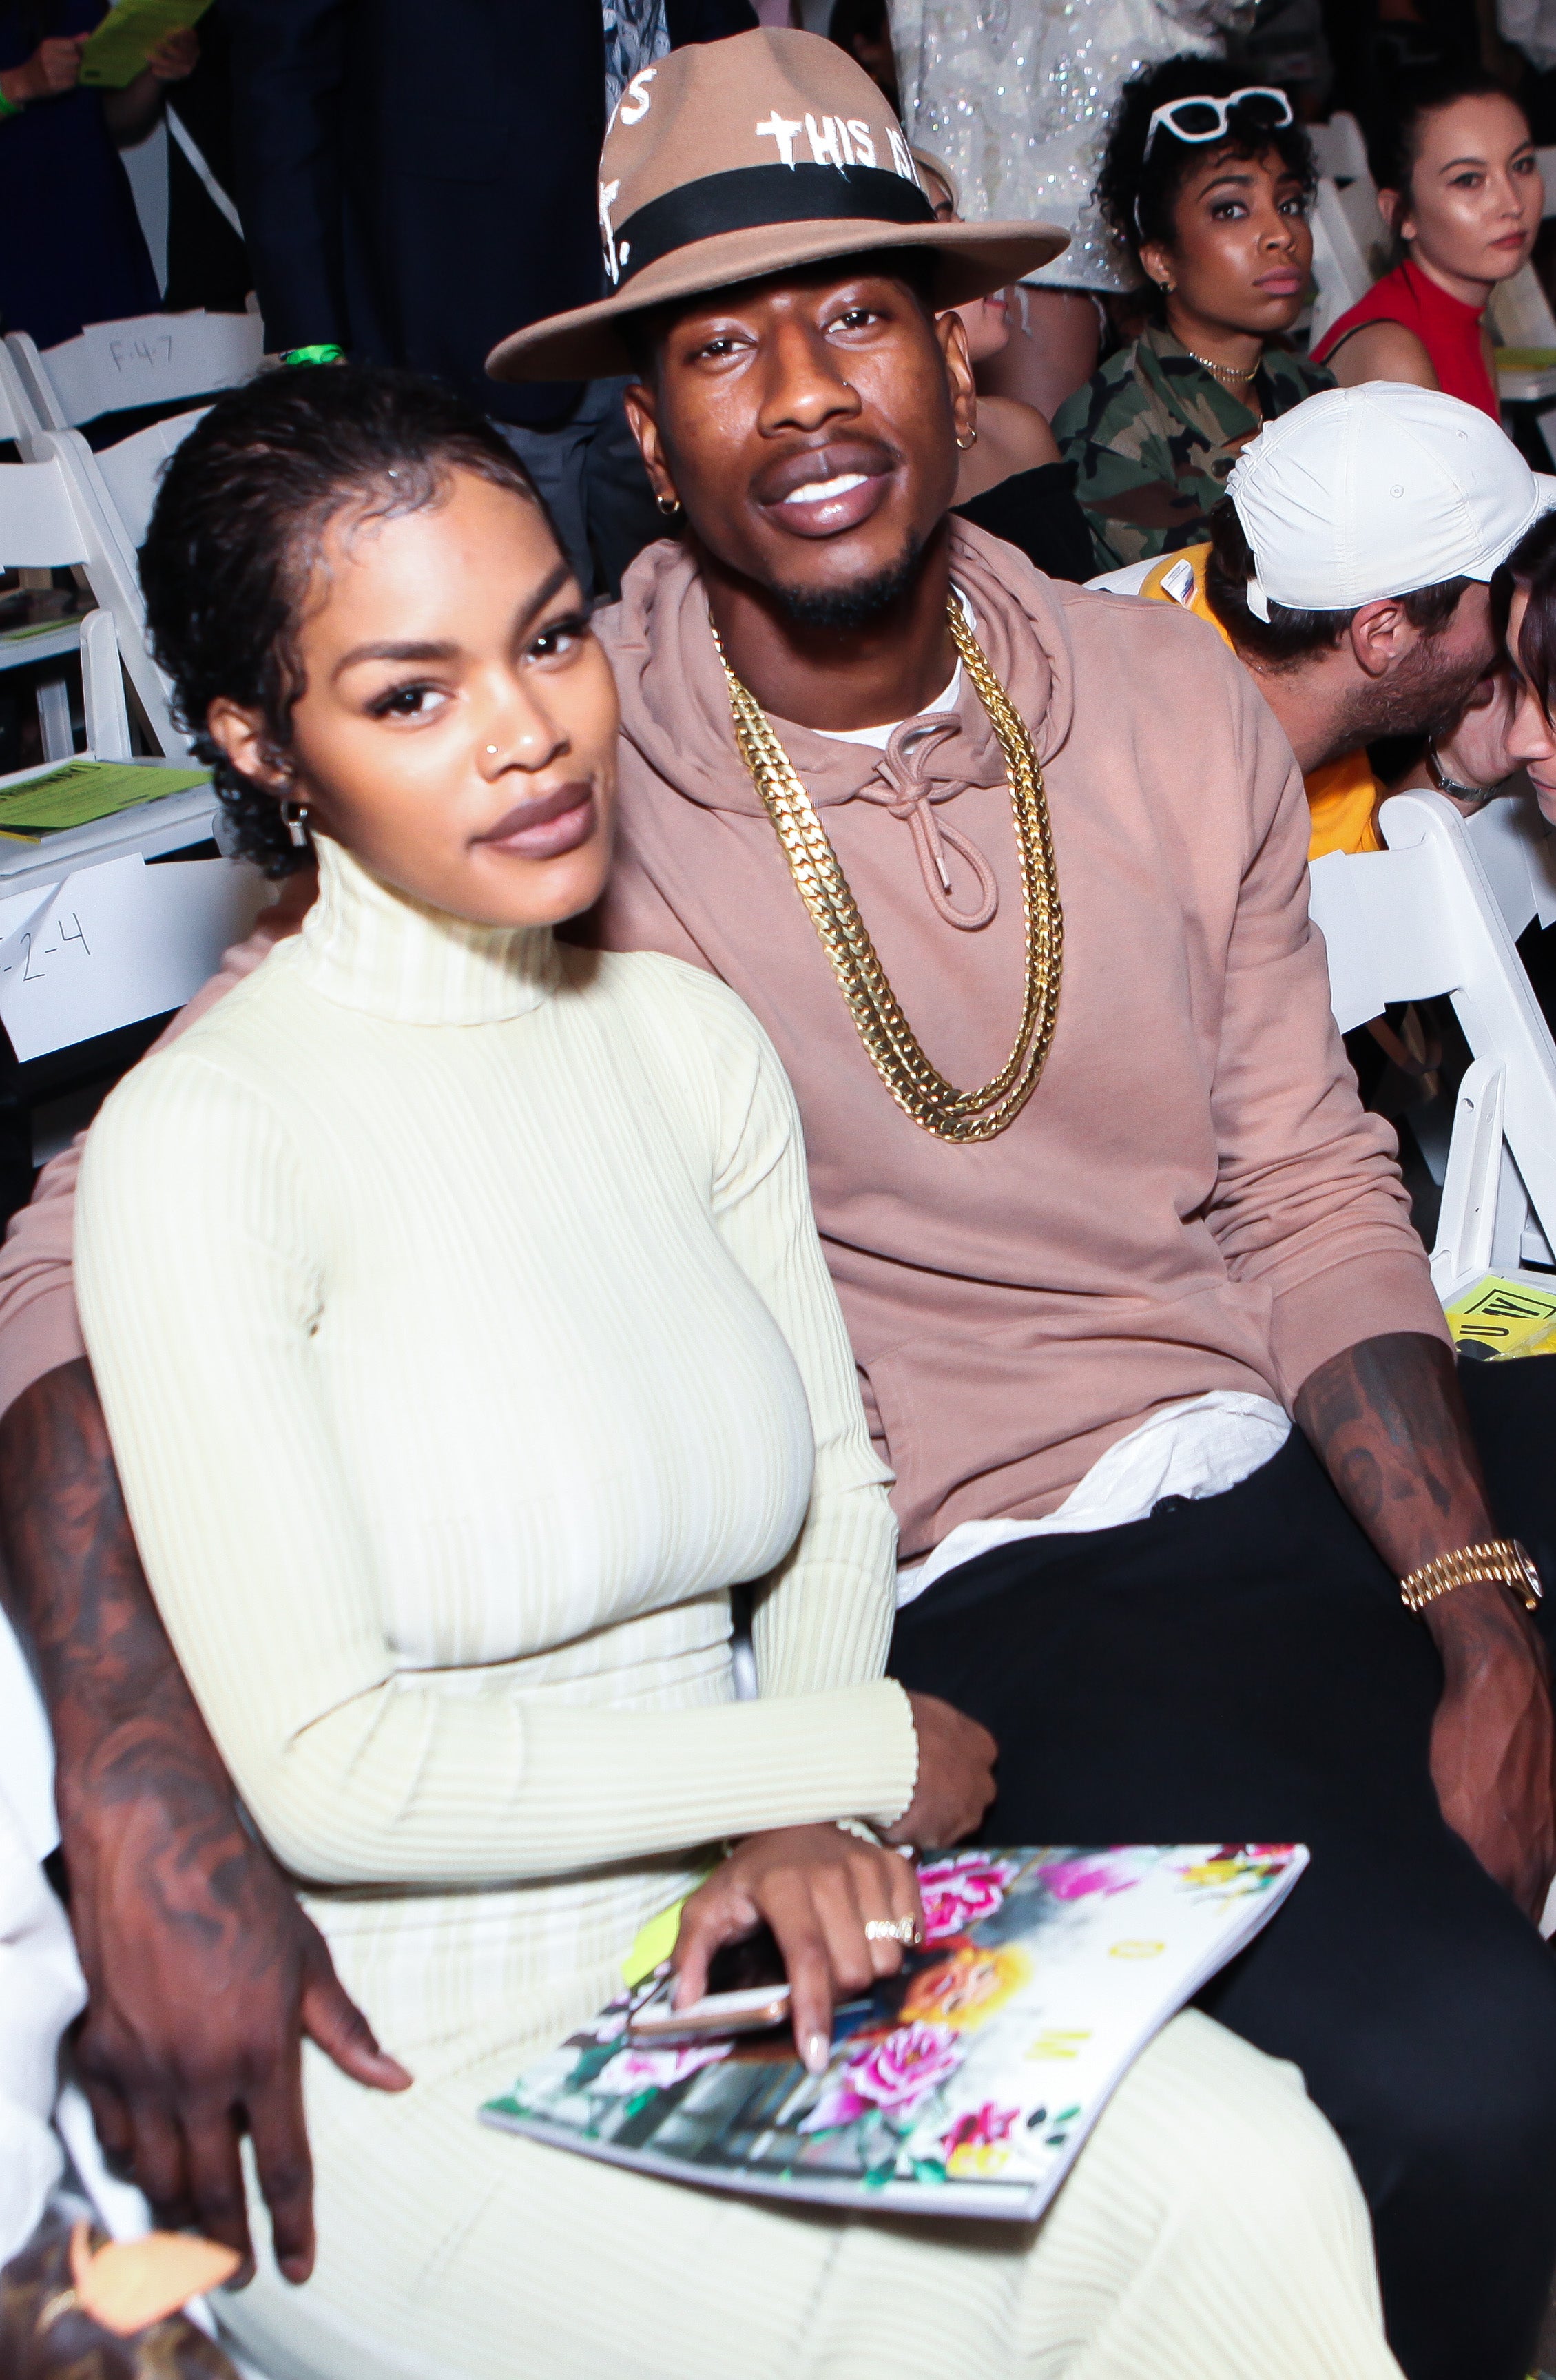 Teyana Taylor's Wedding Day Pic Has Us Wanting To Get Married In Red Leather Jackets
